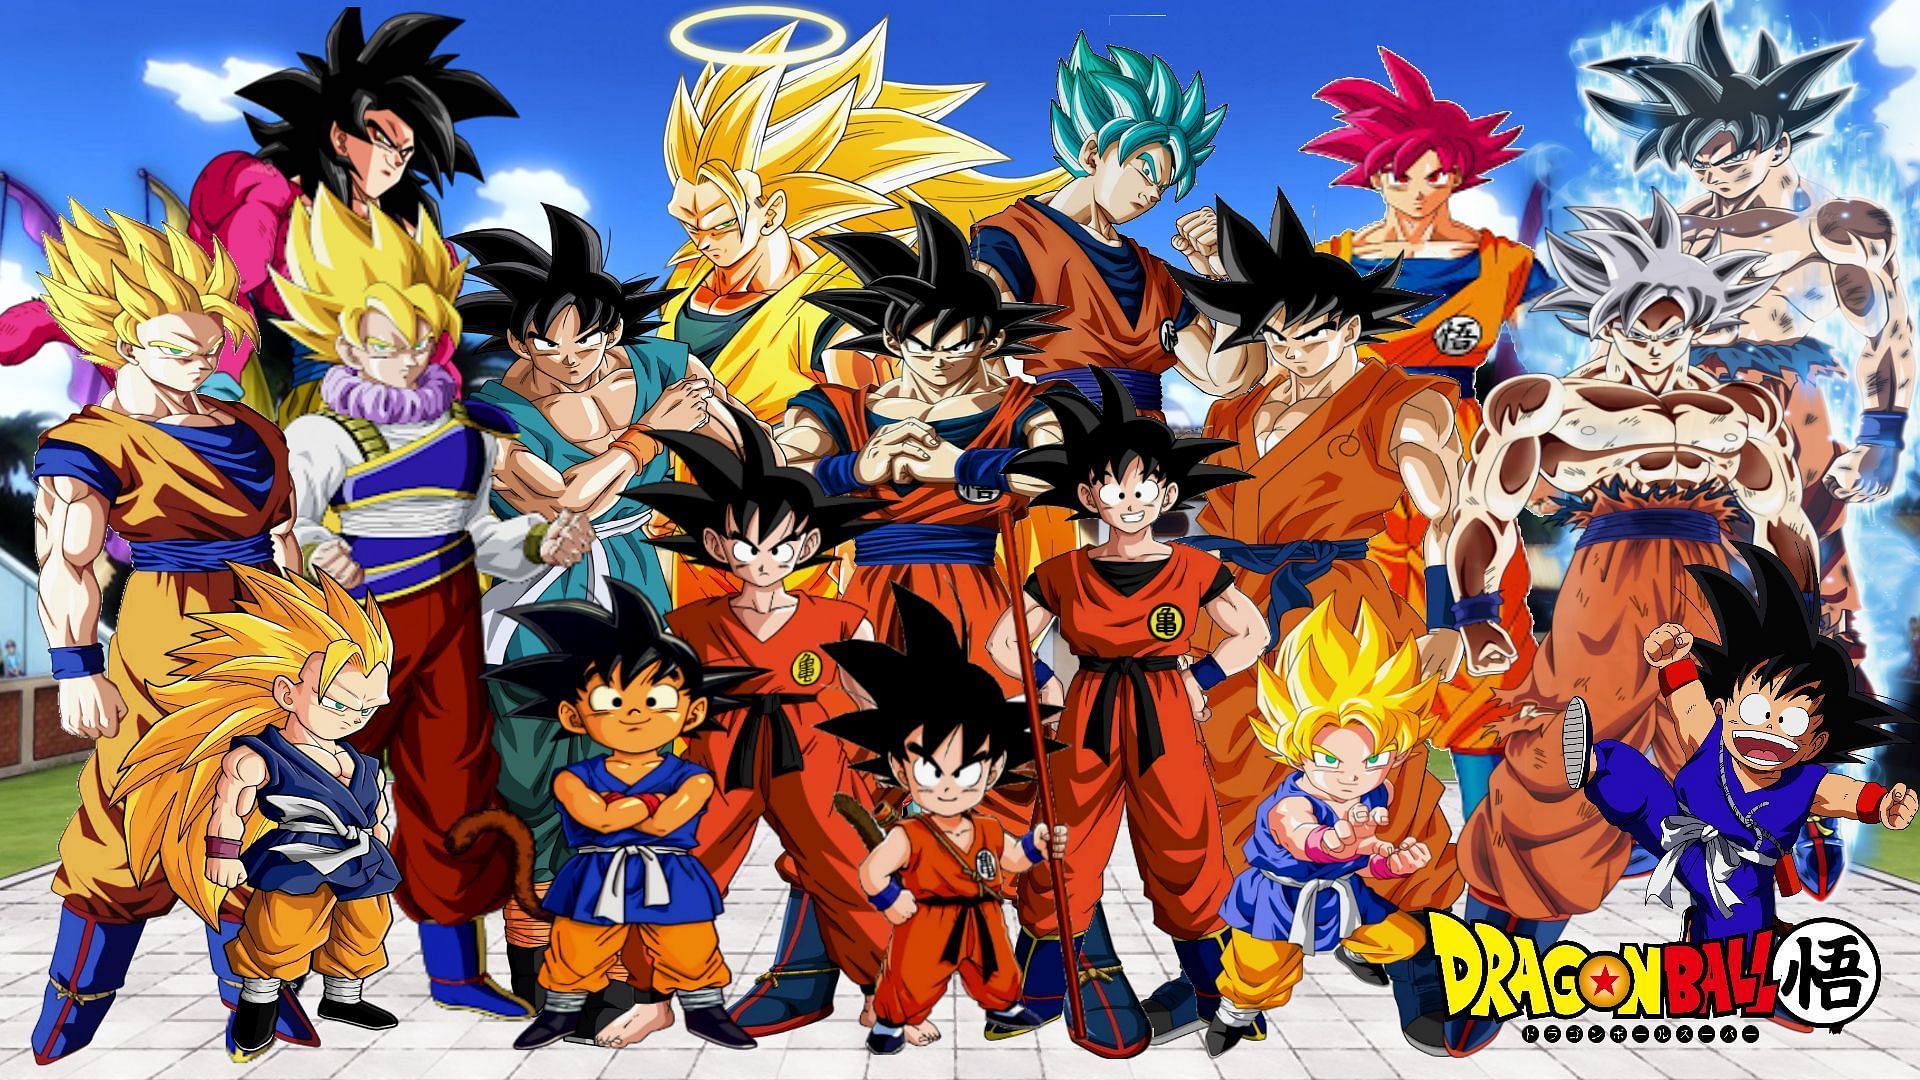 10 strongest Dragon Ball forms, ranked from strongest to weakest